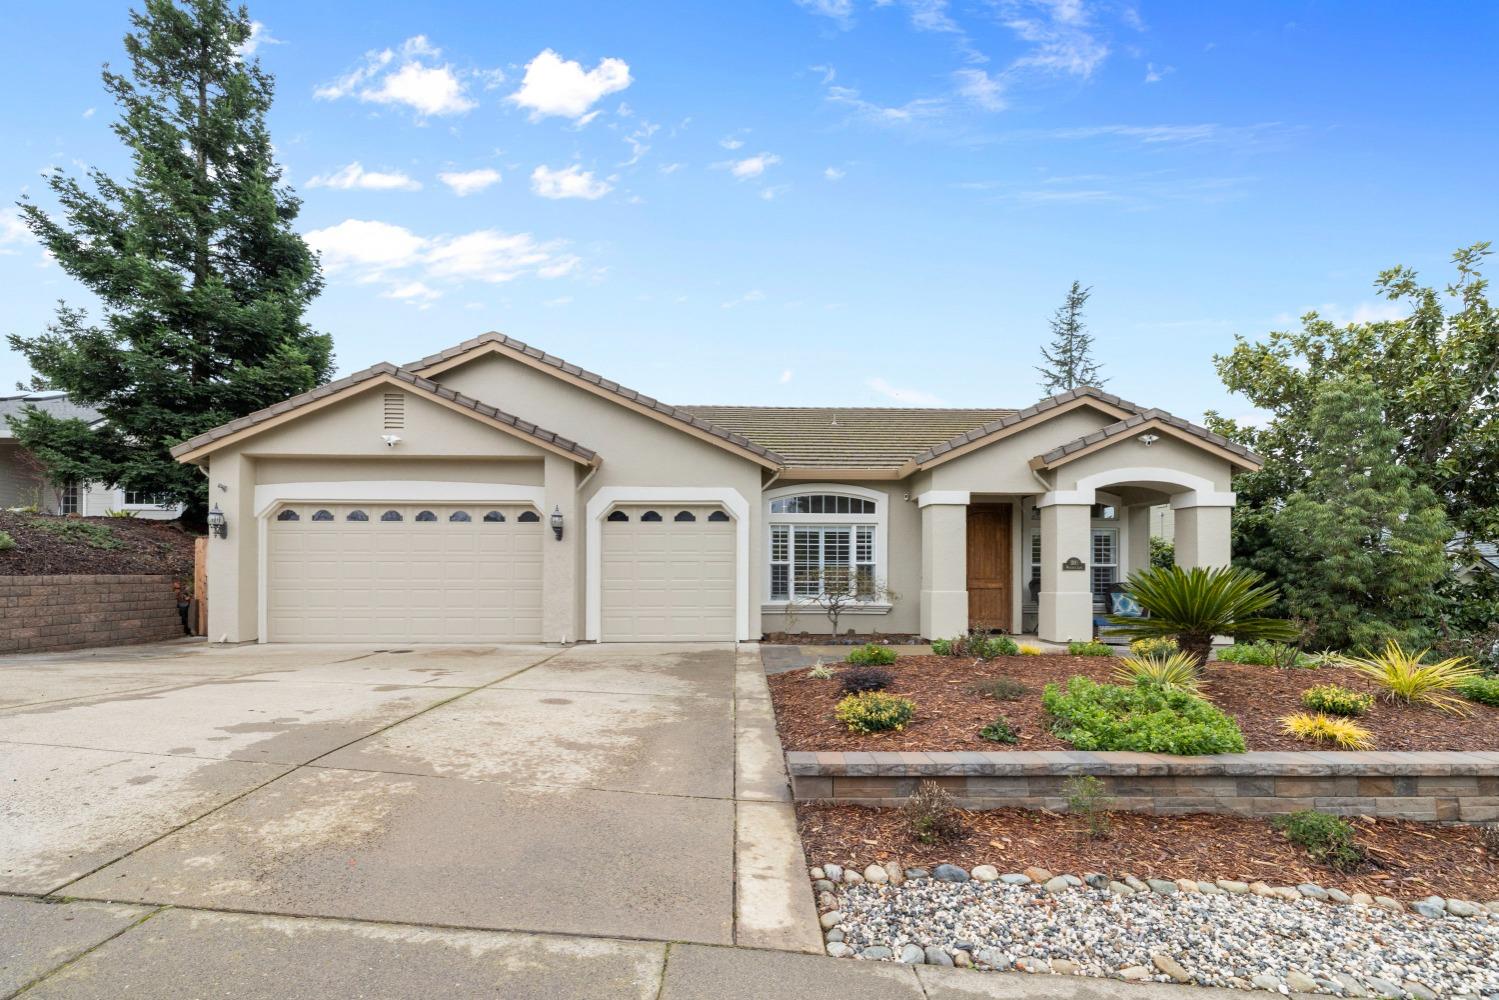 Photo of 3180 Woodleigh Ln in Cameron Park, CA